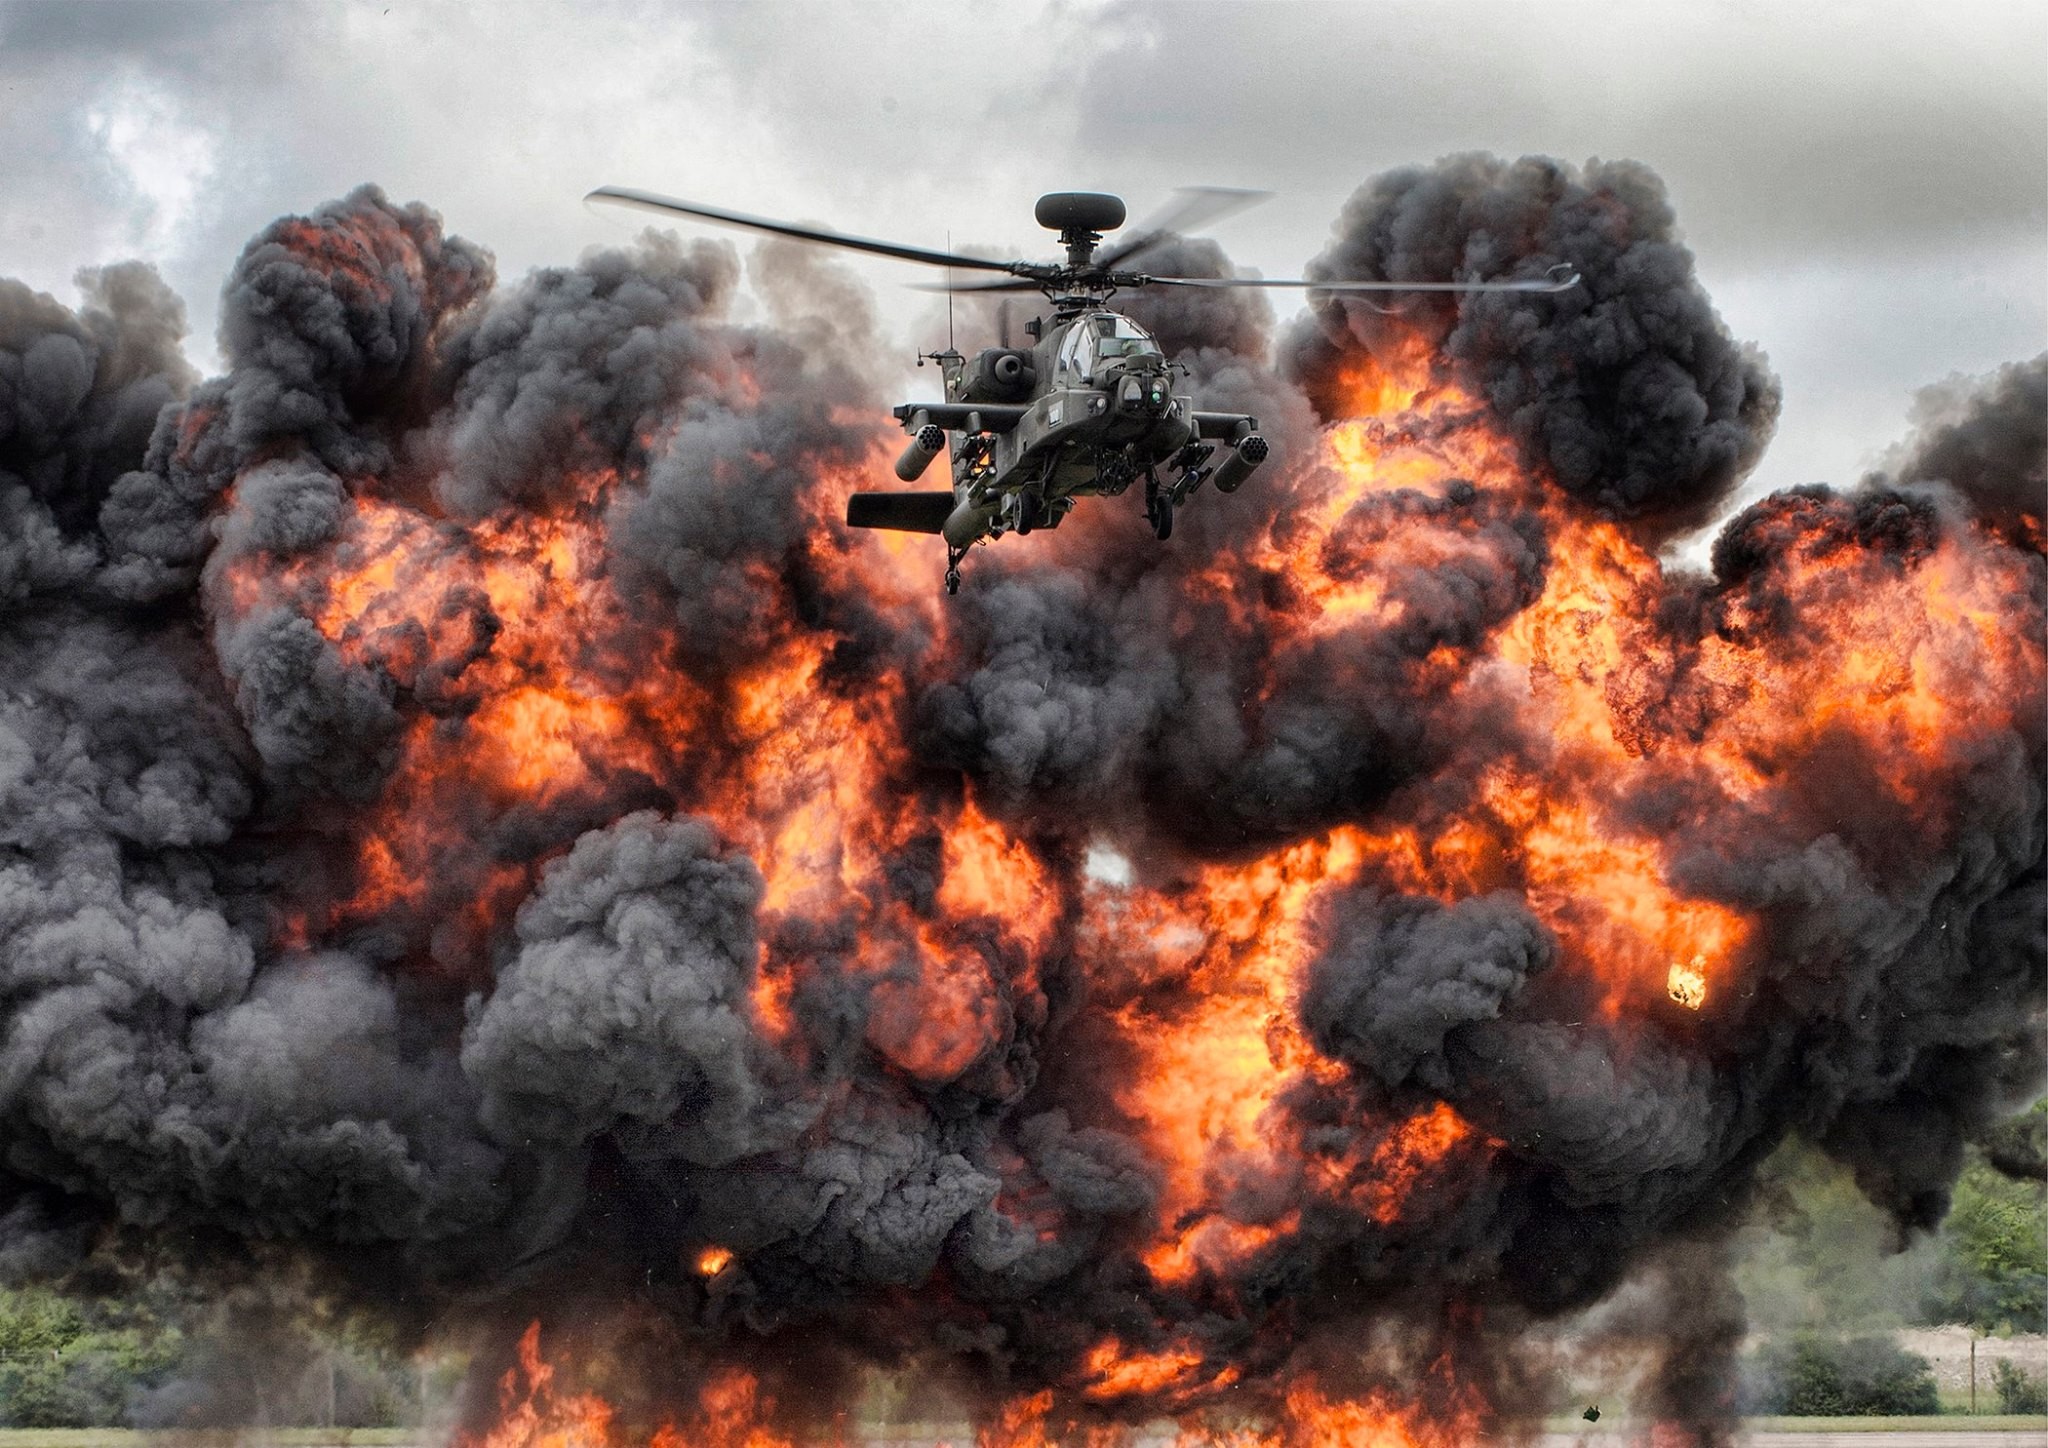 General 2048x1448 explosion military helicopters military aircraft vehicle attack helicopters military vehicle Boeing AH-64 Apache Boeing American aircraft